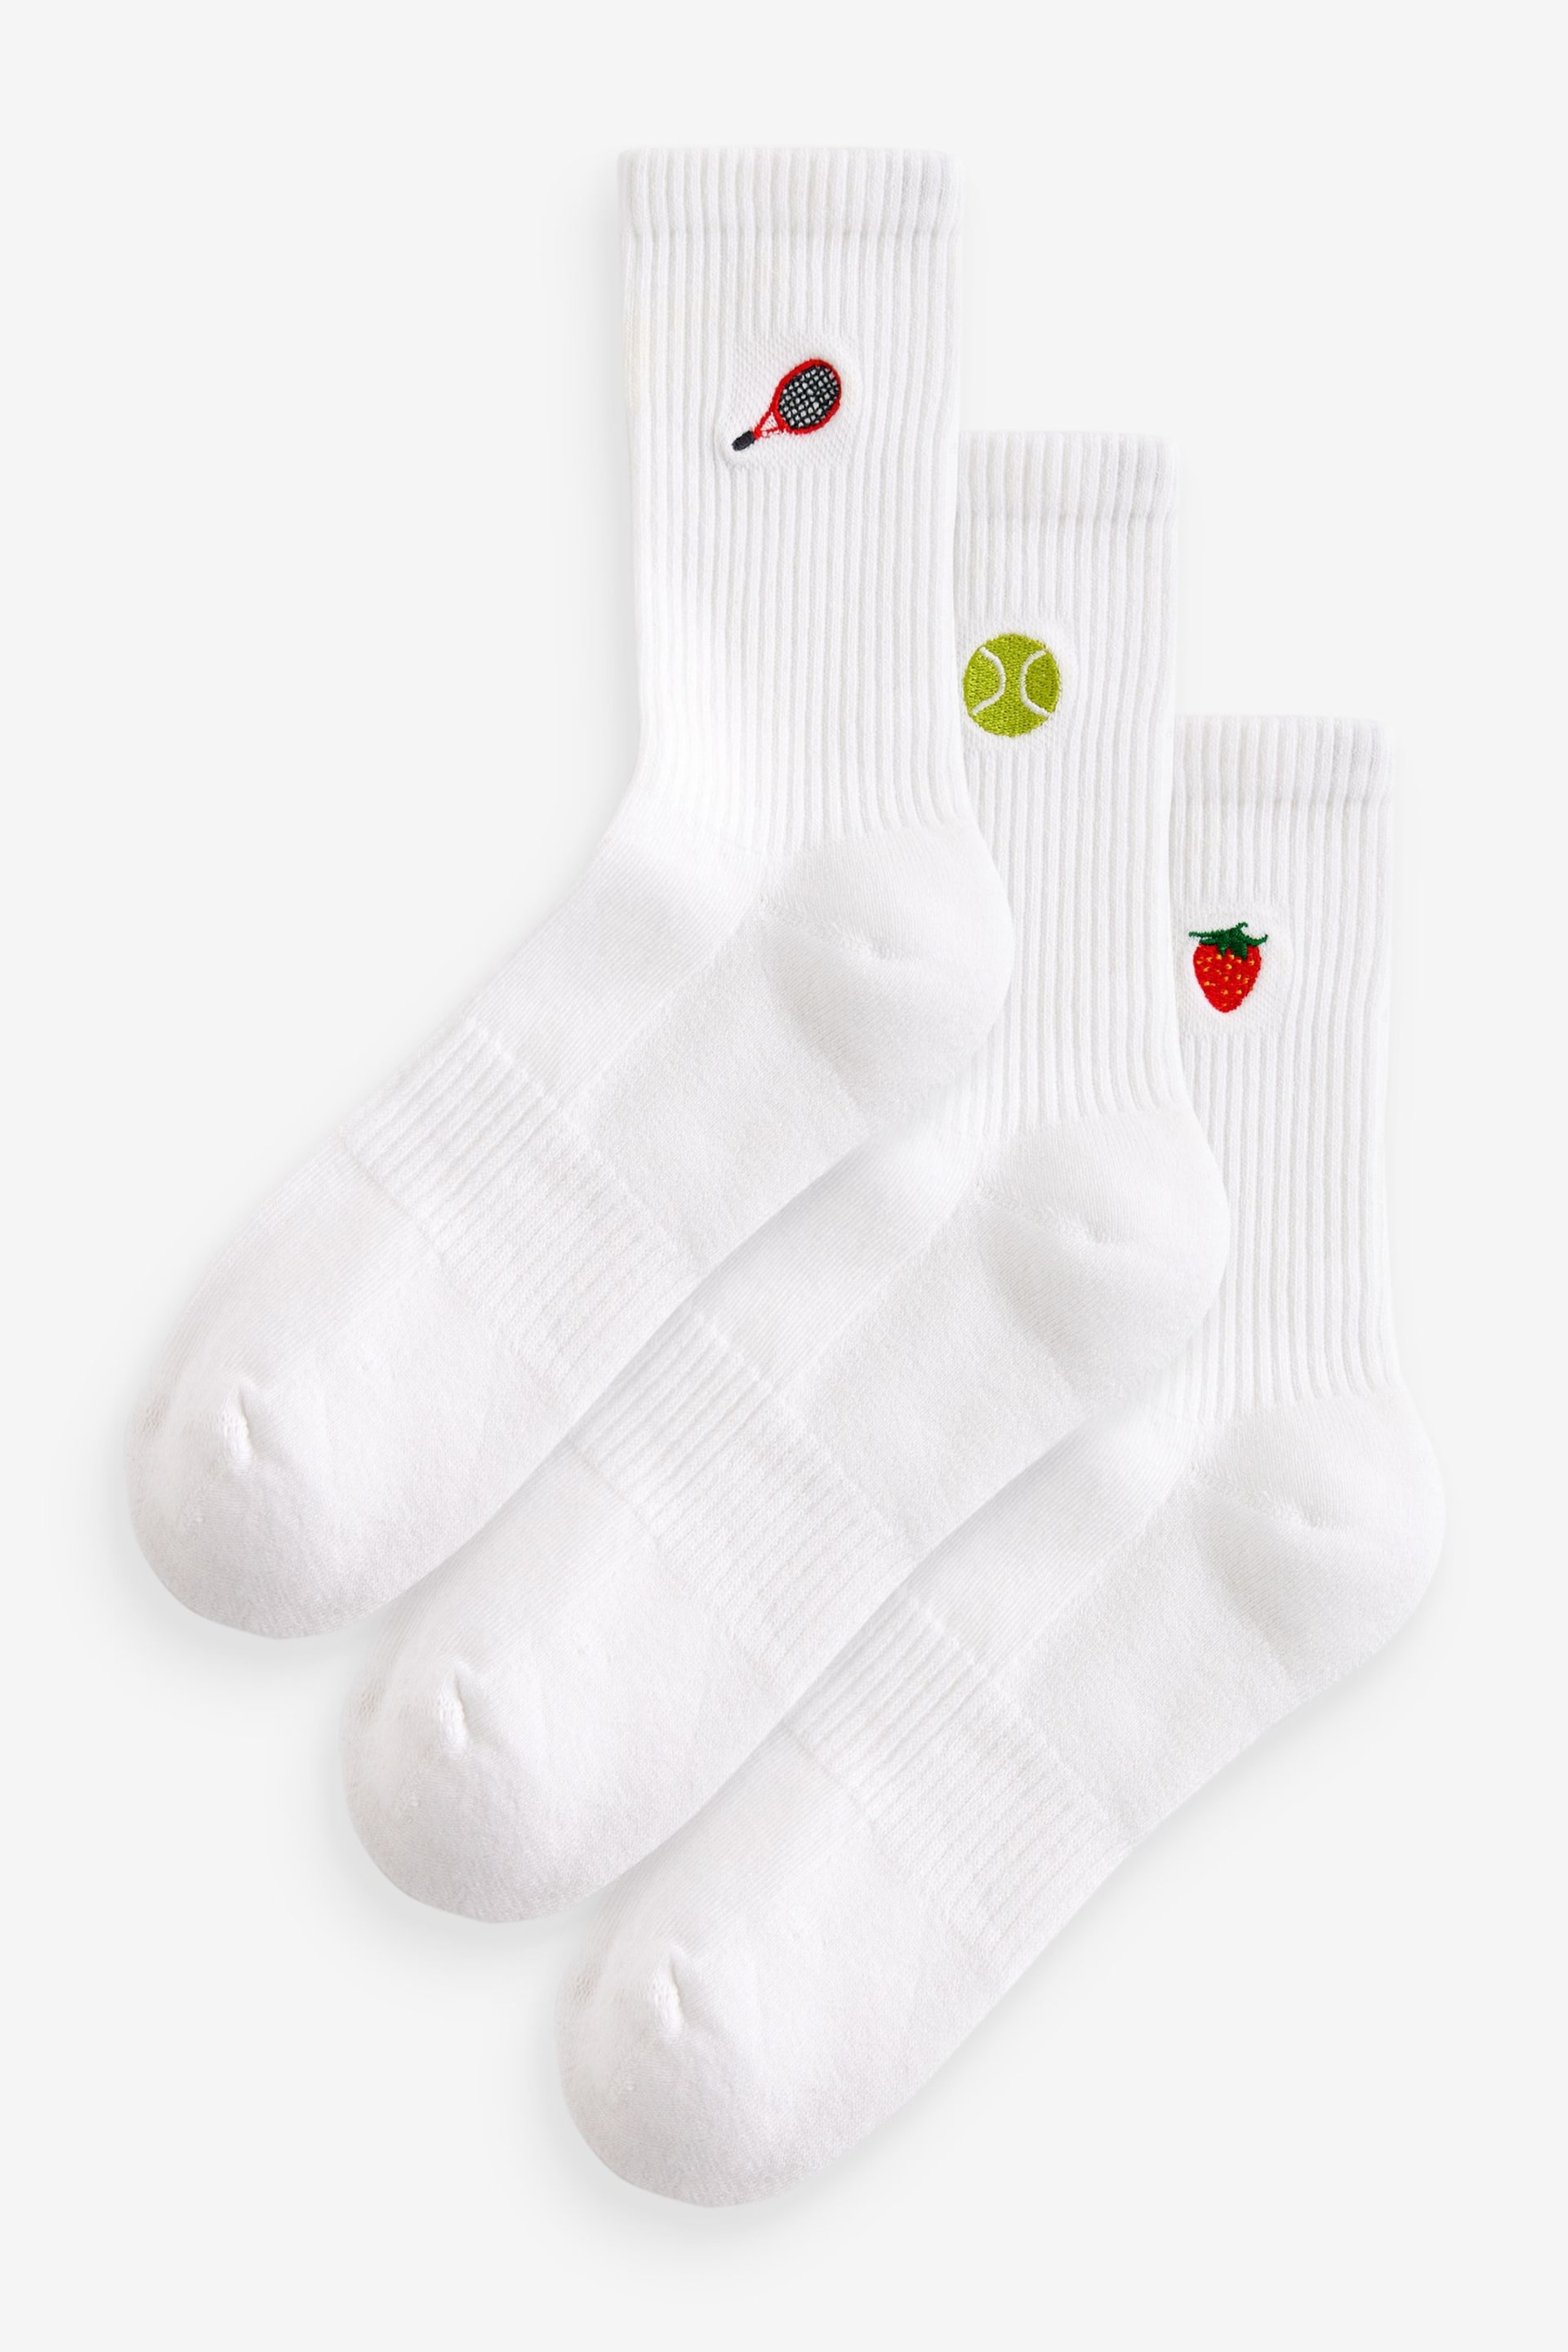 Tennis Embroidered Motif Cushion Sole Ribbed Sport Ankle Socks 3 Pack With Arch Support - Image 1 of 2